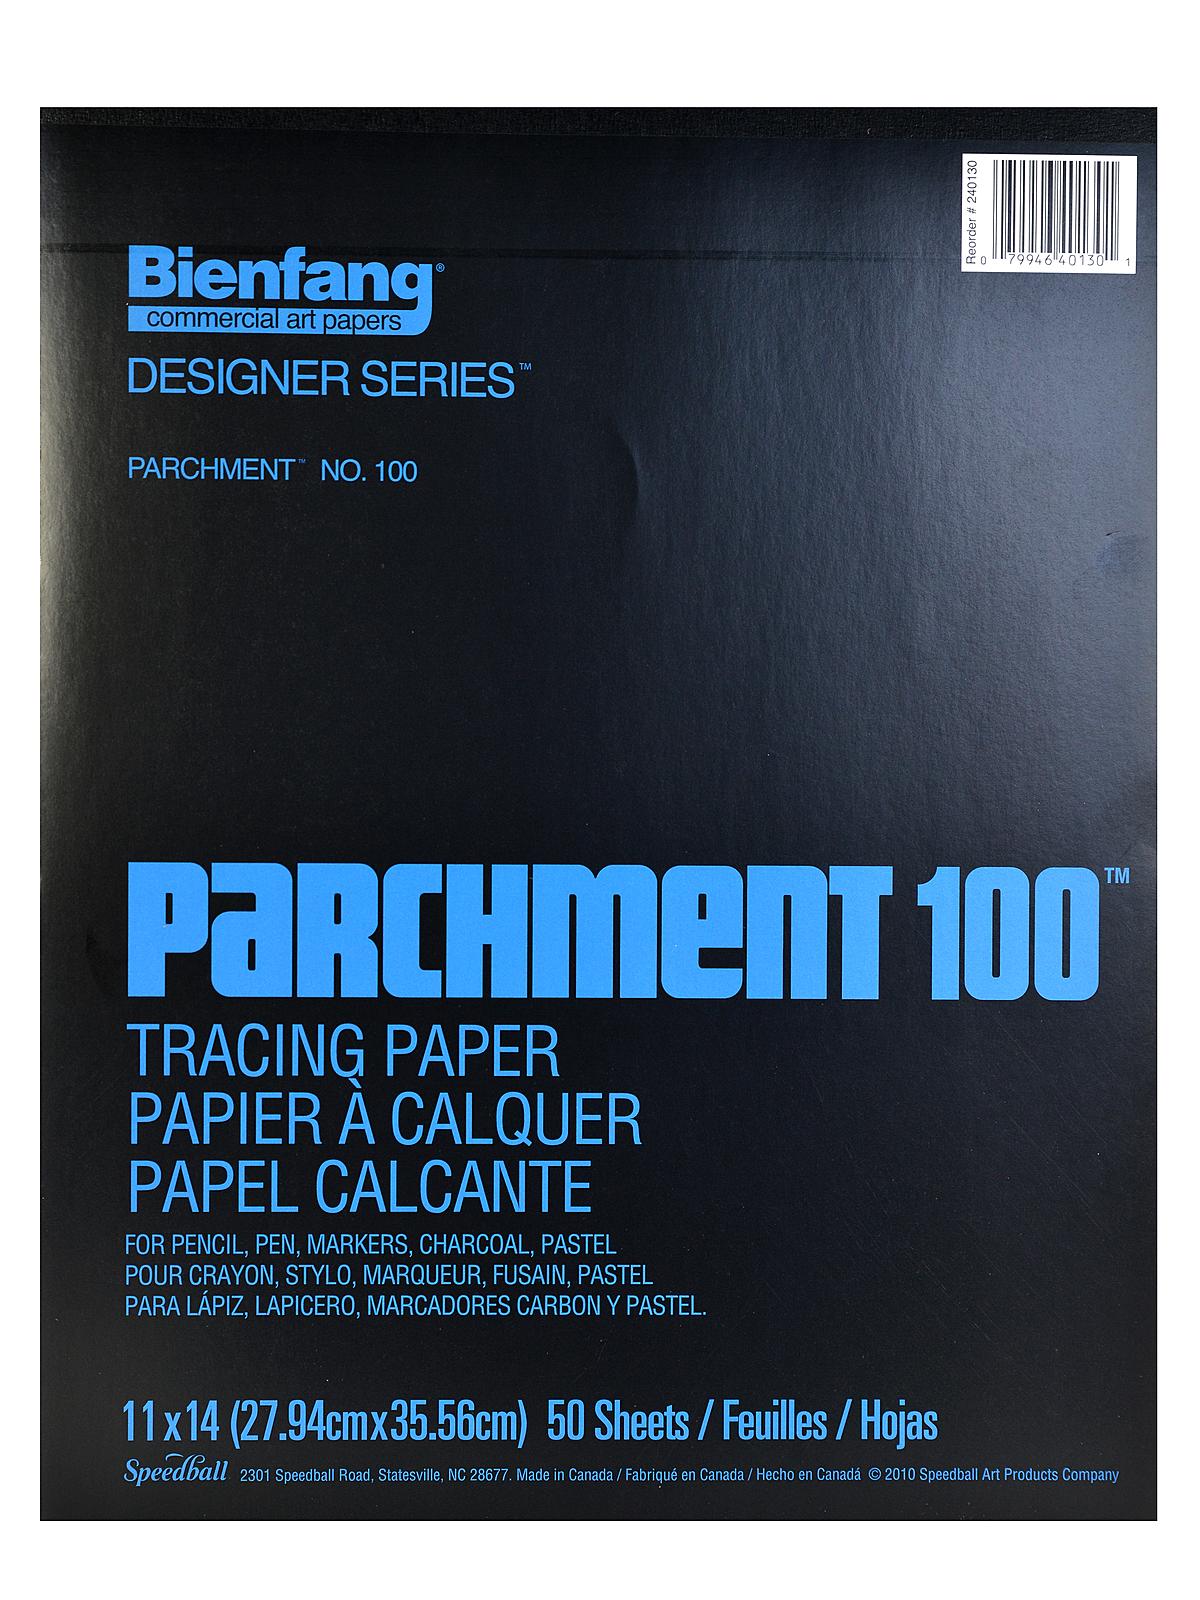 Parchment 100 Tracing Paper 11 In. X 14 In. Pad Of 50 Sheets